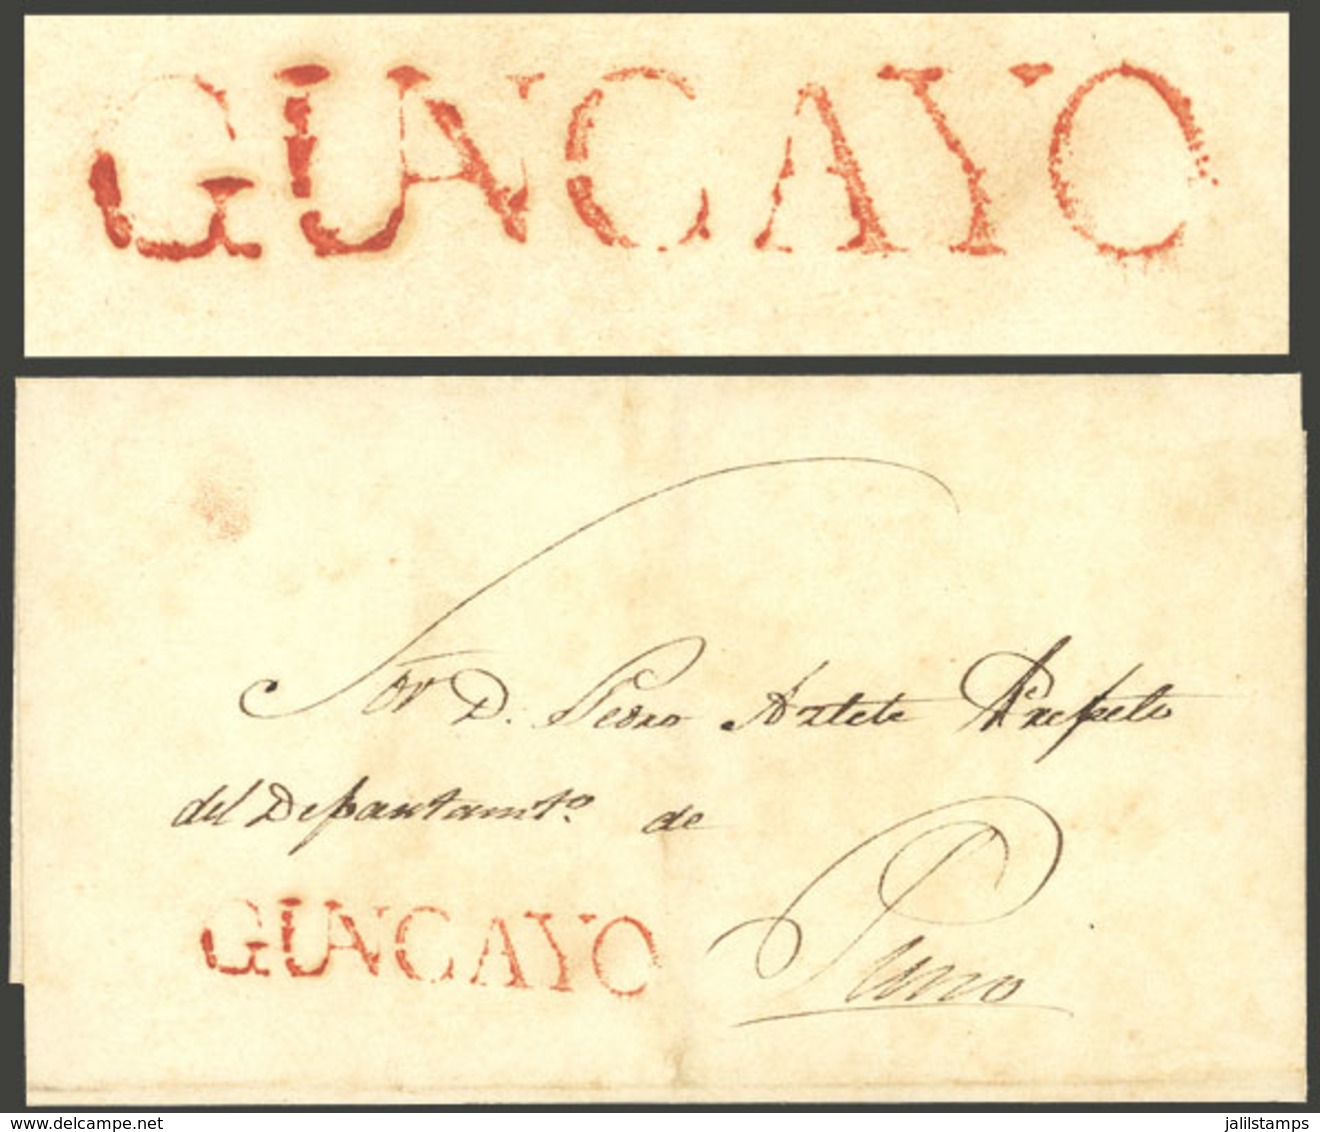 PERU: Folded Cover Sent To Puno With The Mark "GUANCAYO" (Huancayo) Perfectly Applied, Excellent And Very Rare!" - Peru